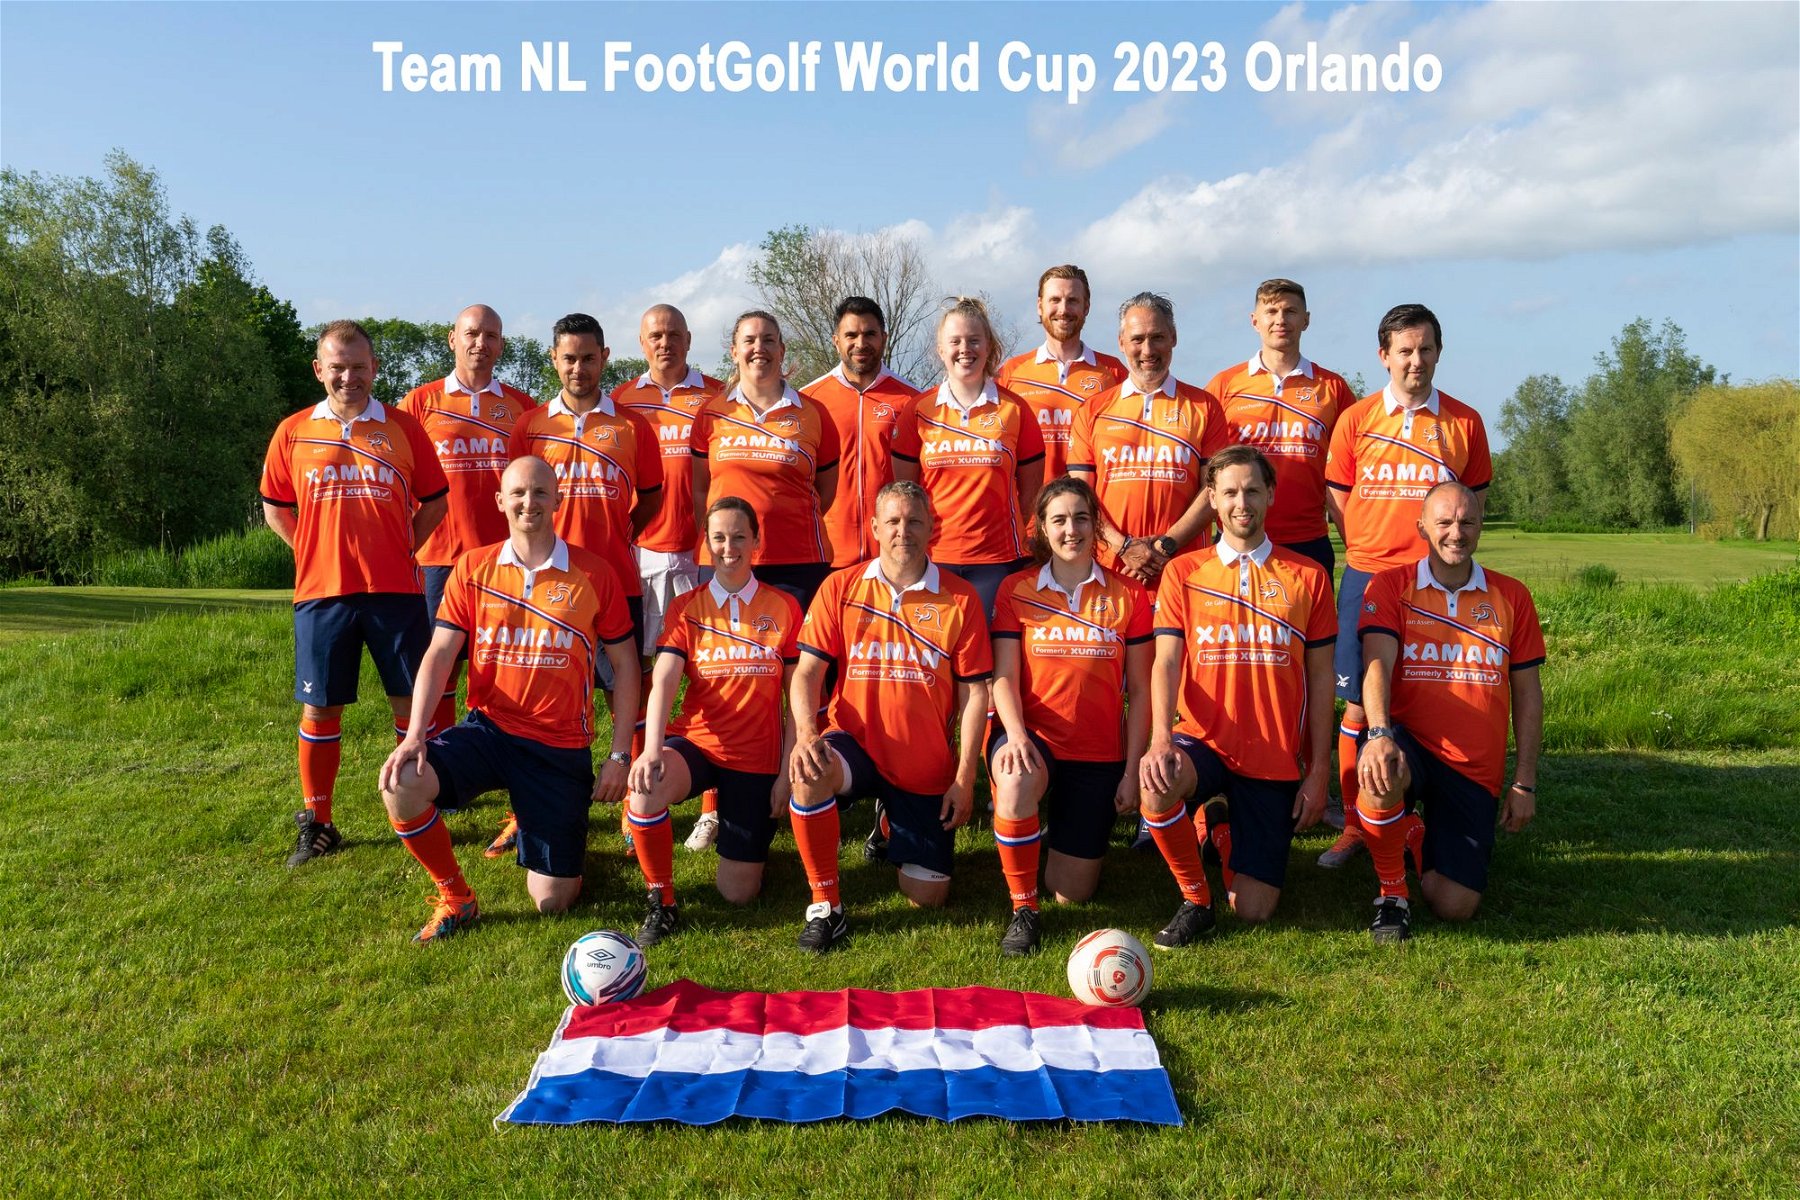 Team Netherlands at the FootGolf World Cup is rocking the Xaman logo.